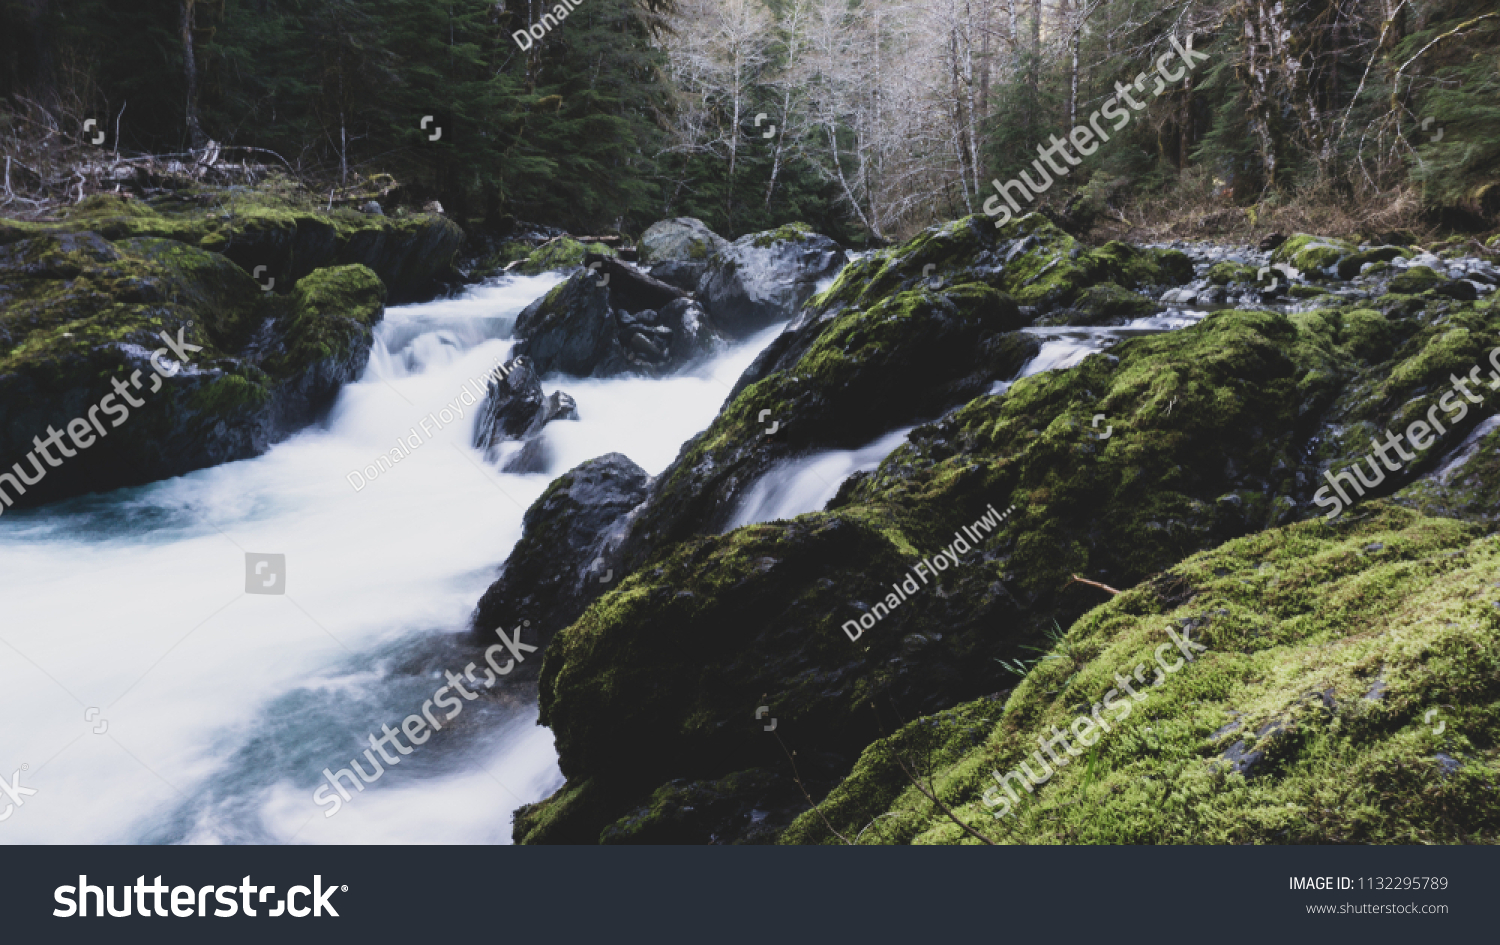 Landscapes from Washington State National Forests and National Parks. #1132295789